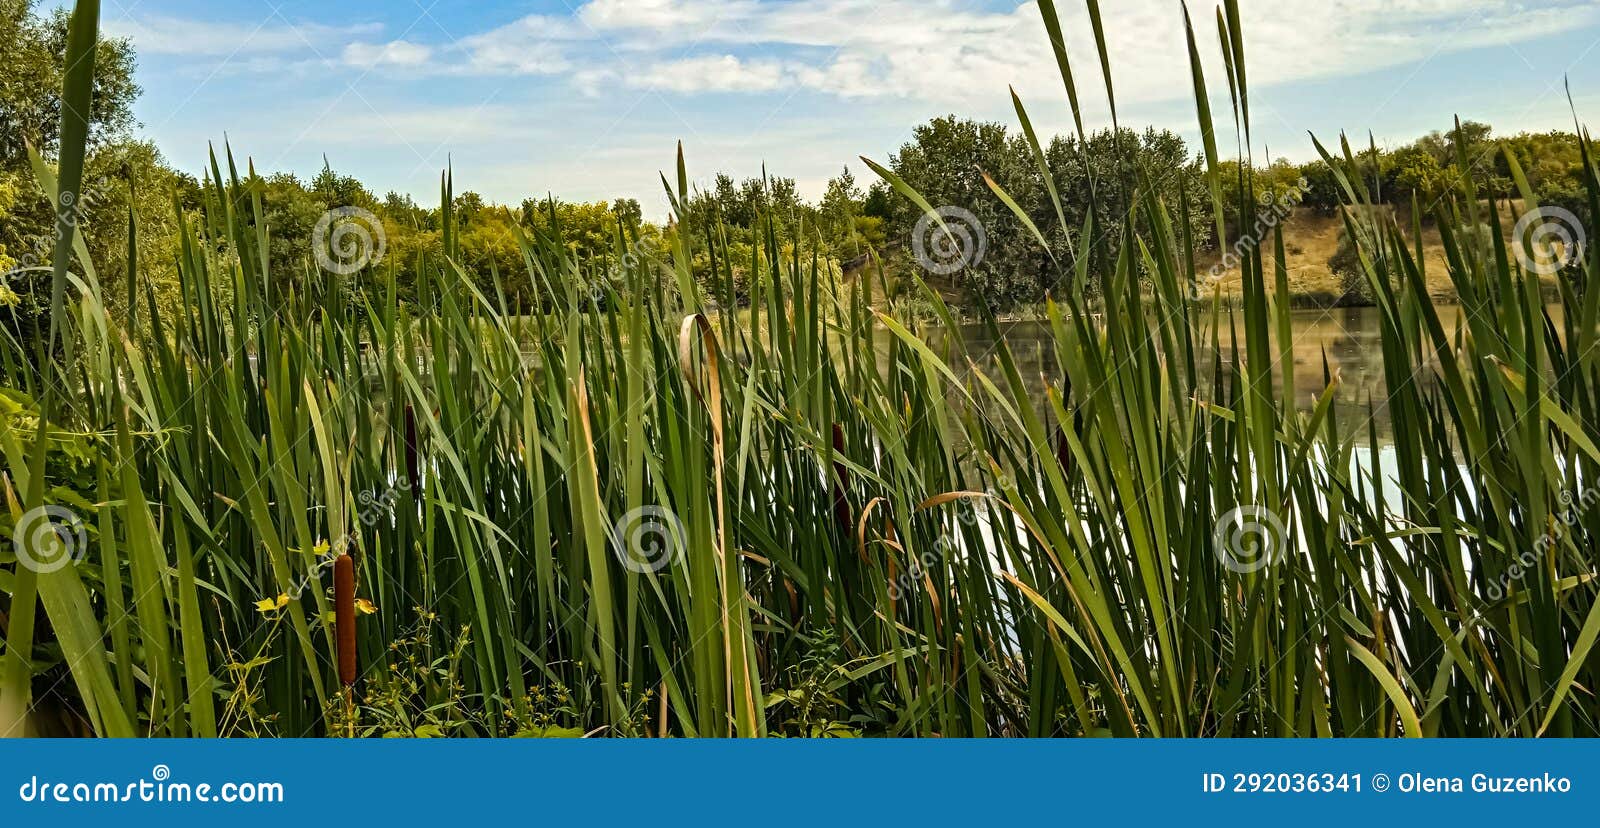 Reeds on the Bank of a Picturesque River Stock Image - Image of bank ...